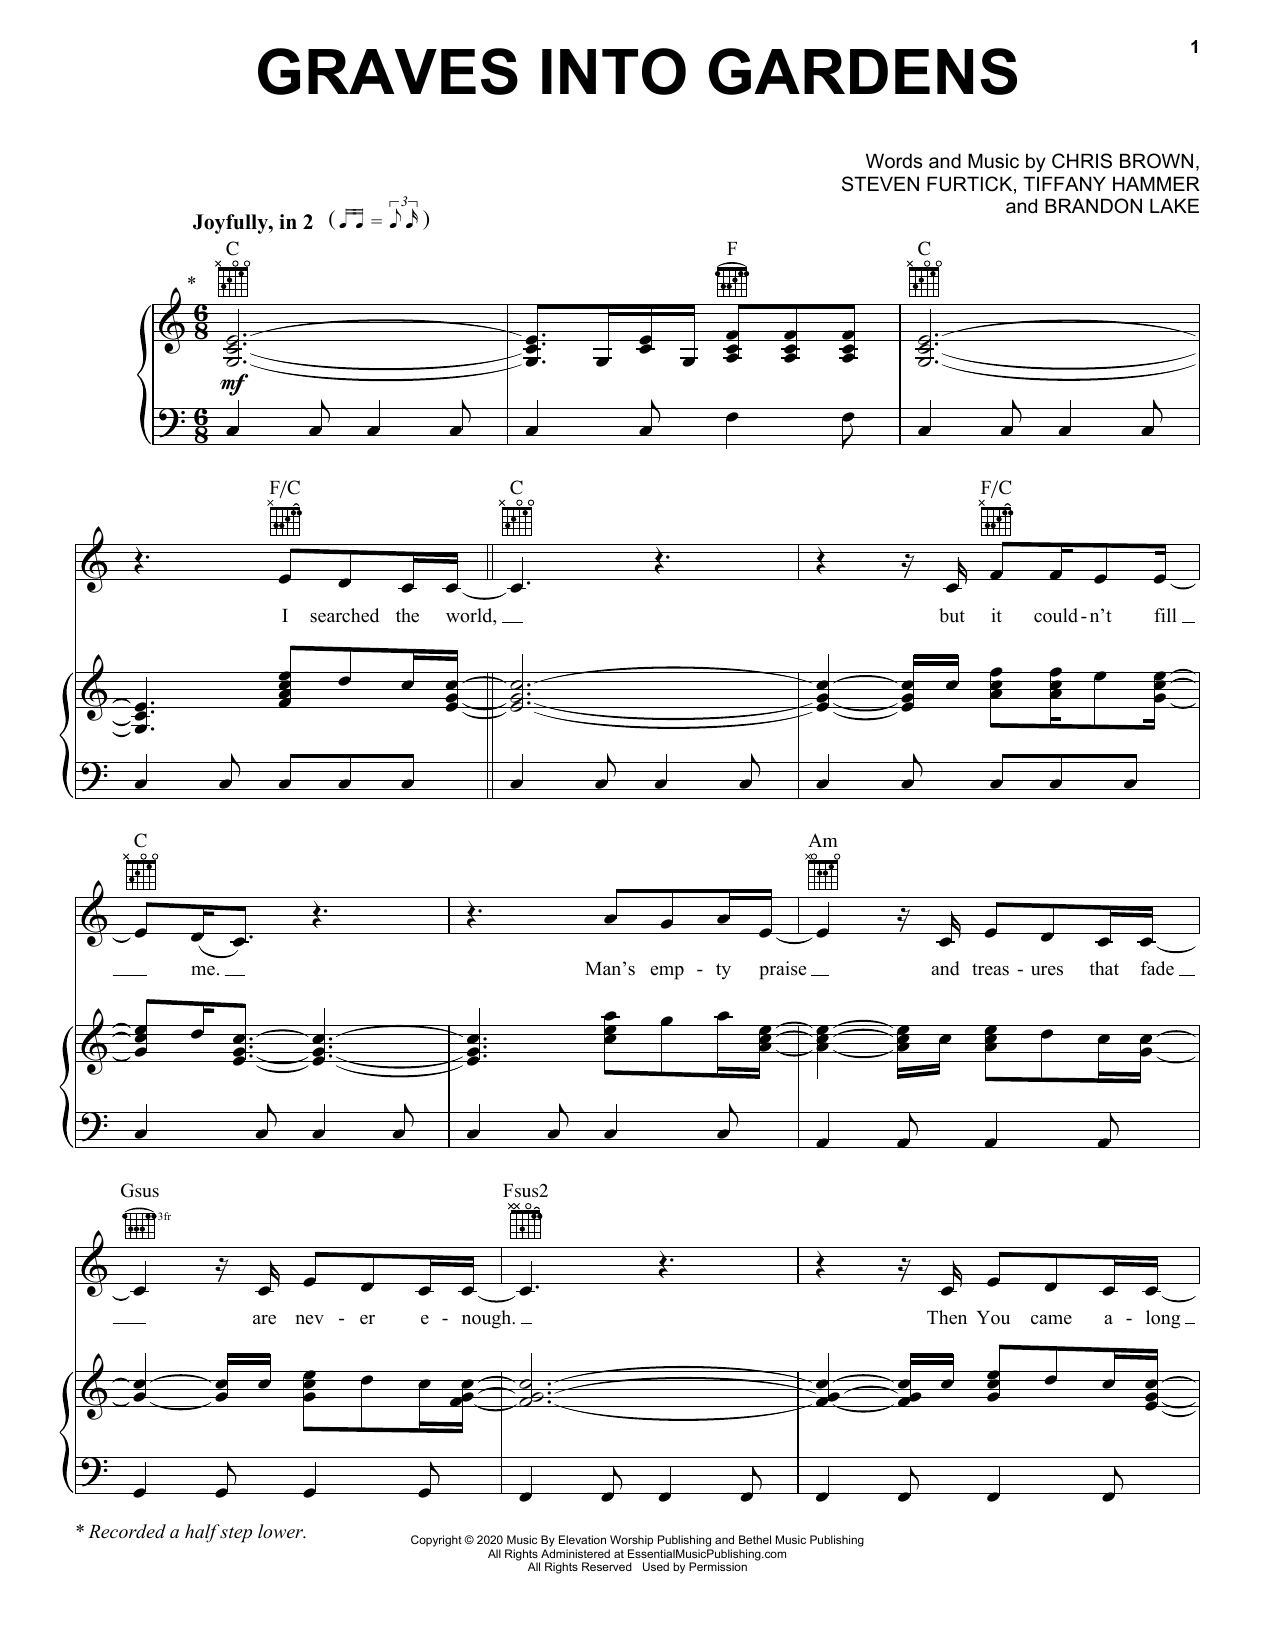 Elevation Worship Graves Into Gardens sheet music notes and chords. Download Printable PDF.